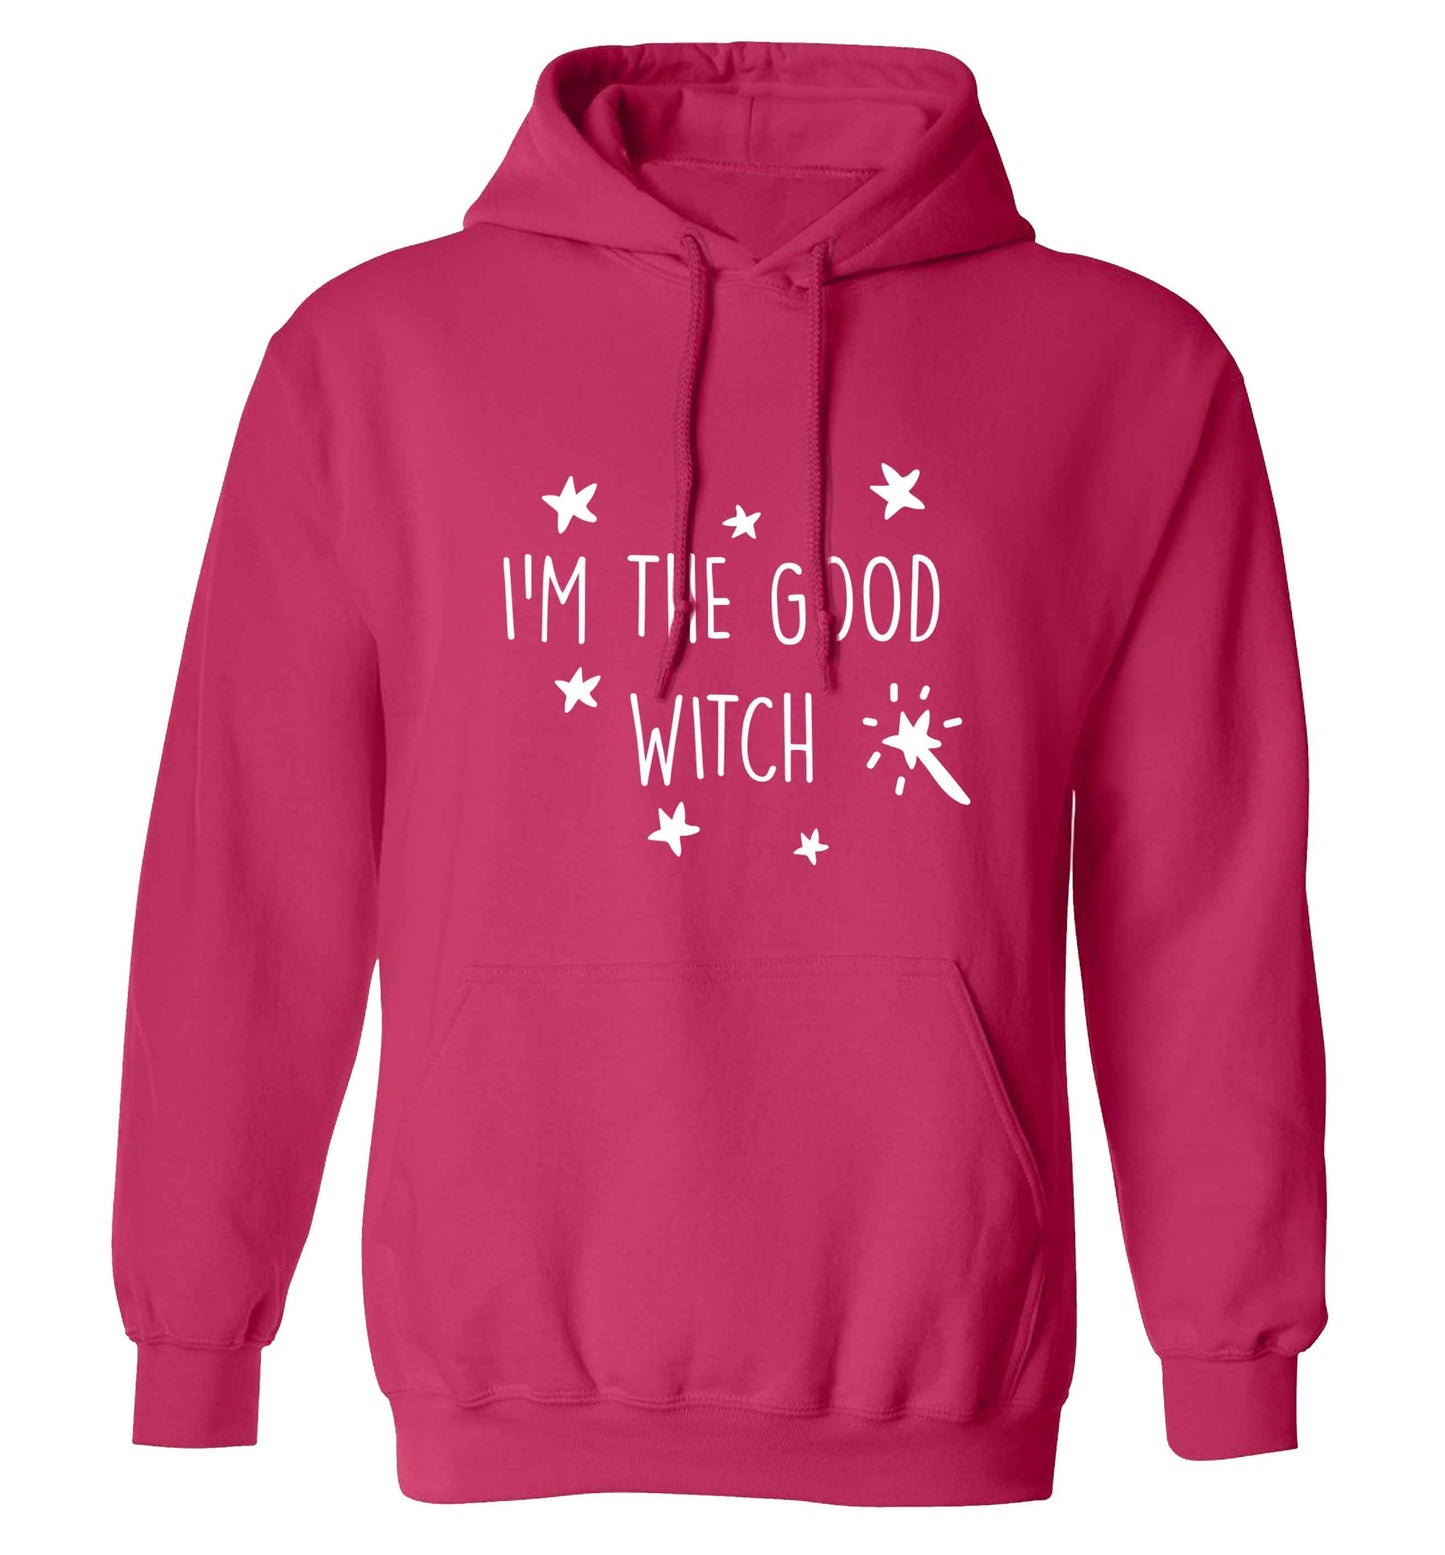 Good witch adults unisex pink hoodie 2XL